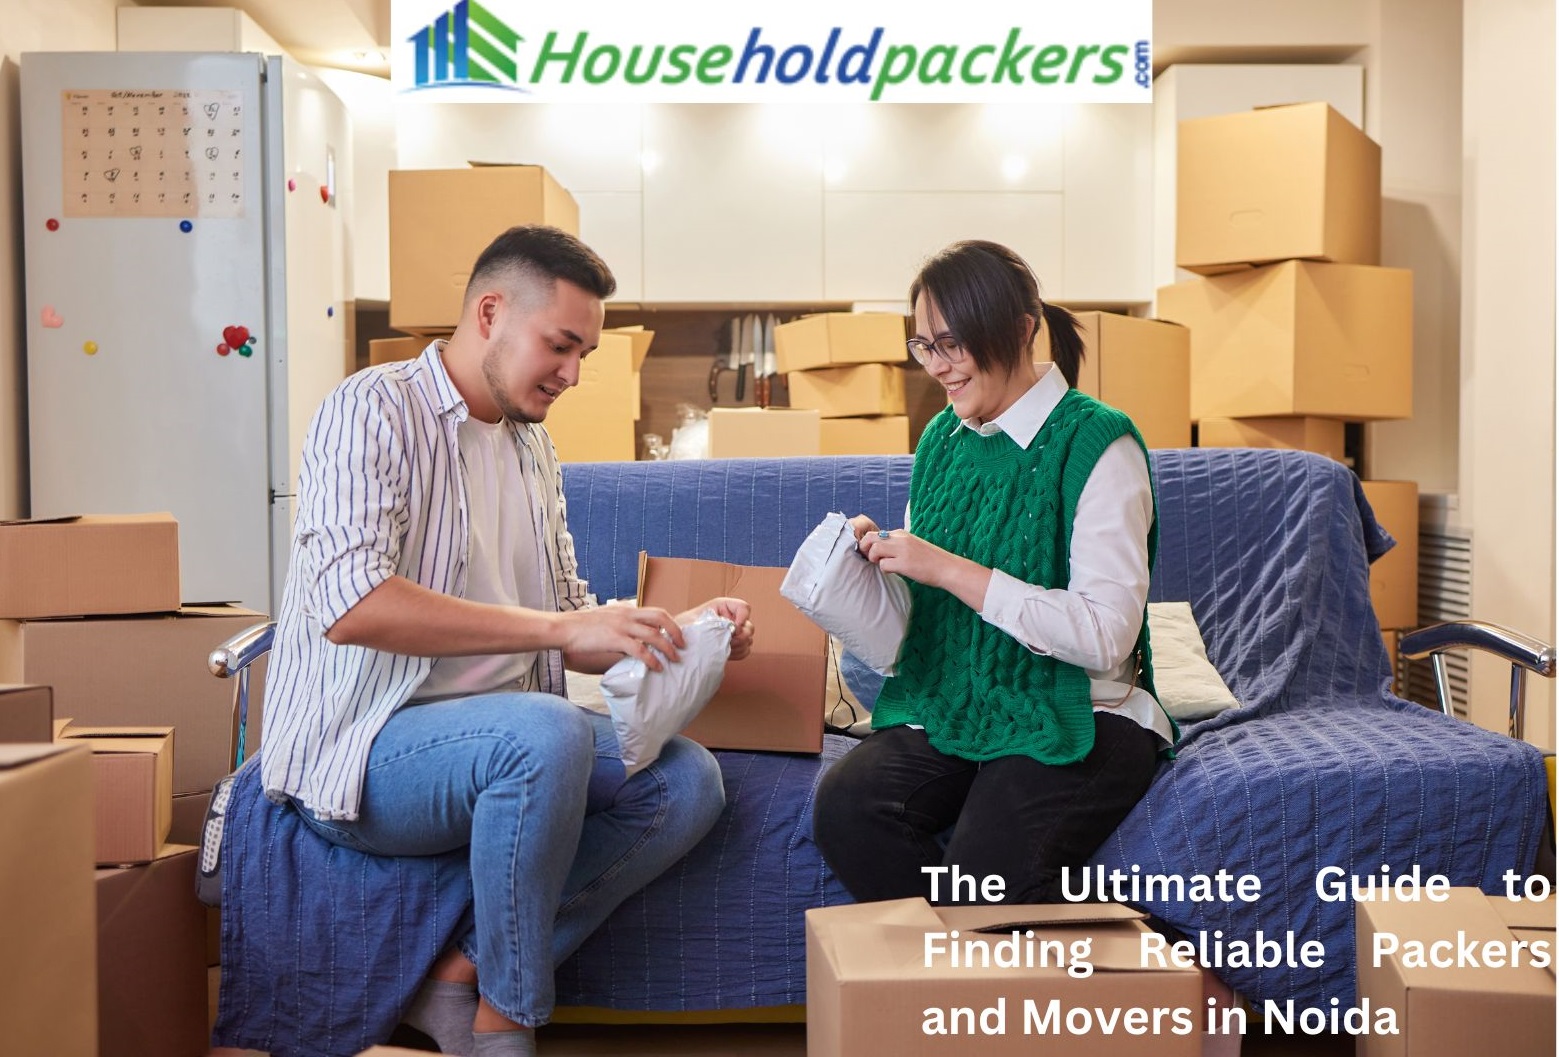 The Ultimate Guide to Finding Reliable Packers and Movers in Noida